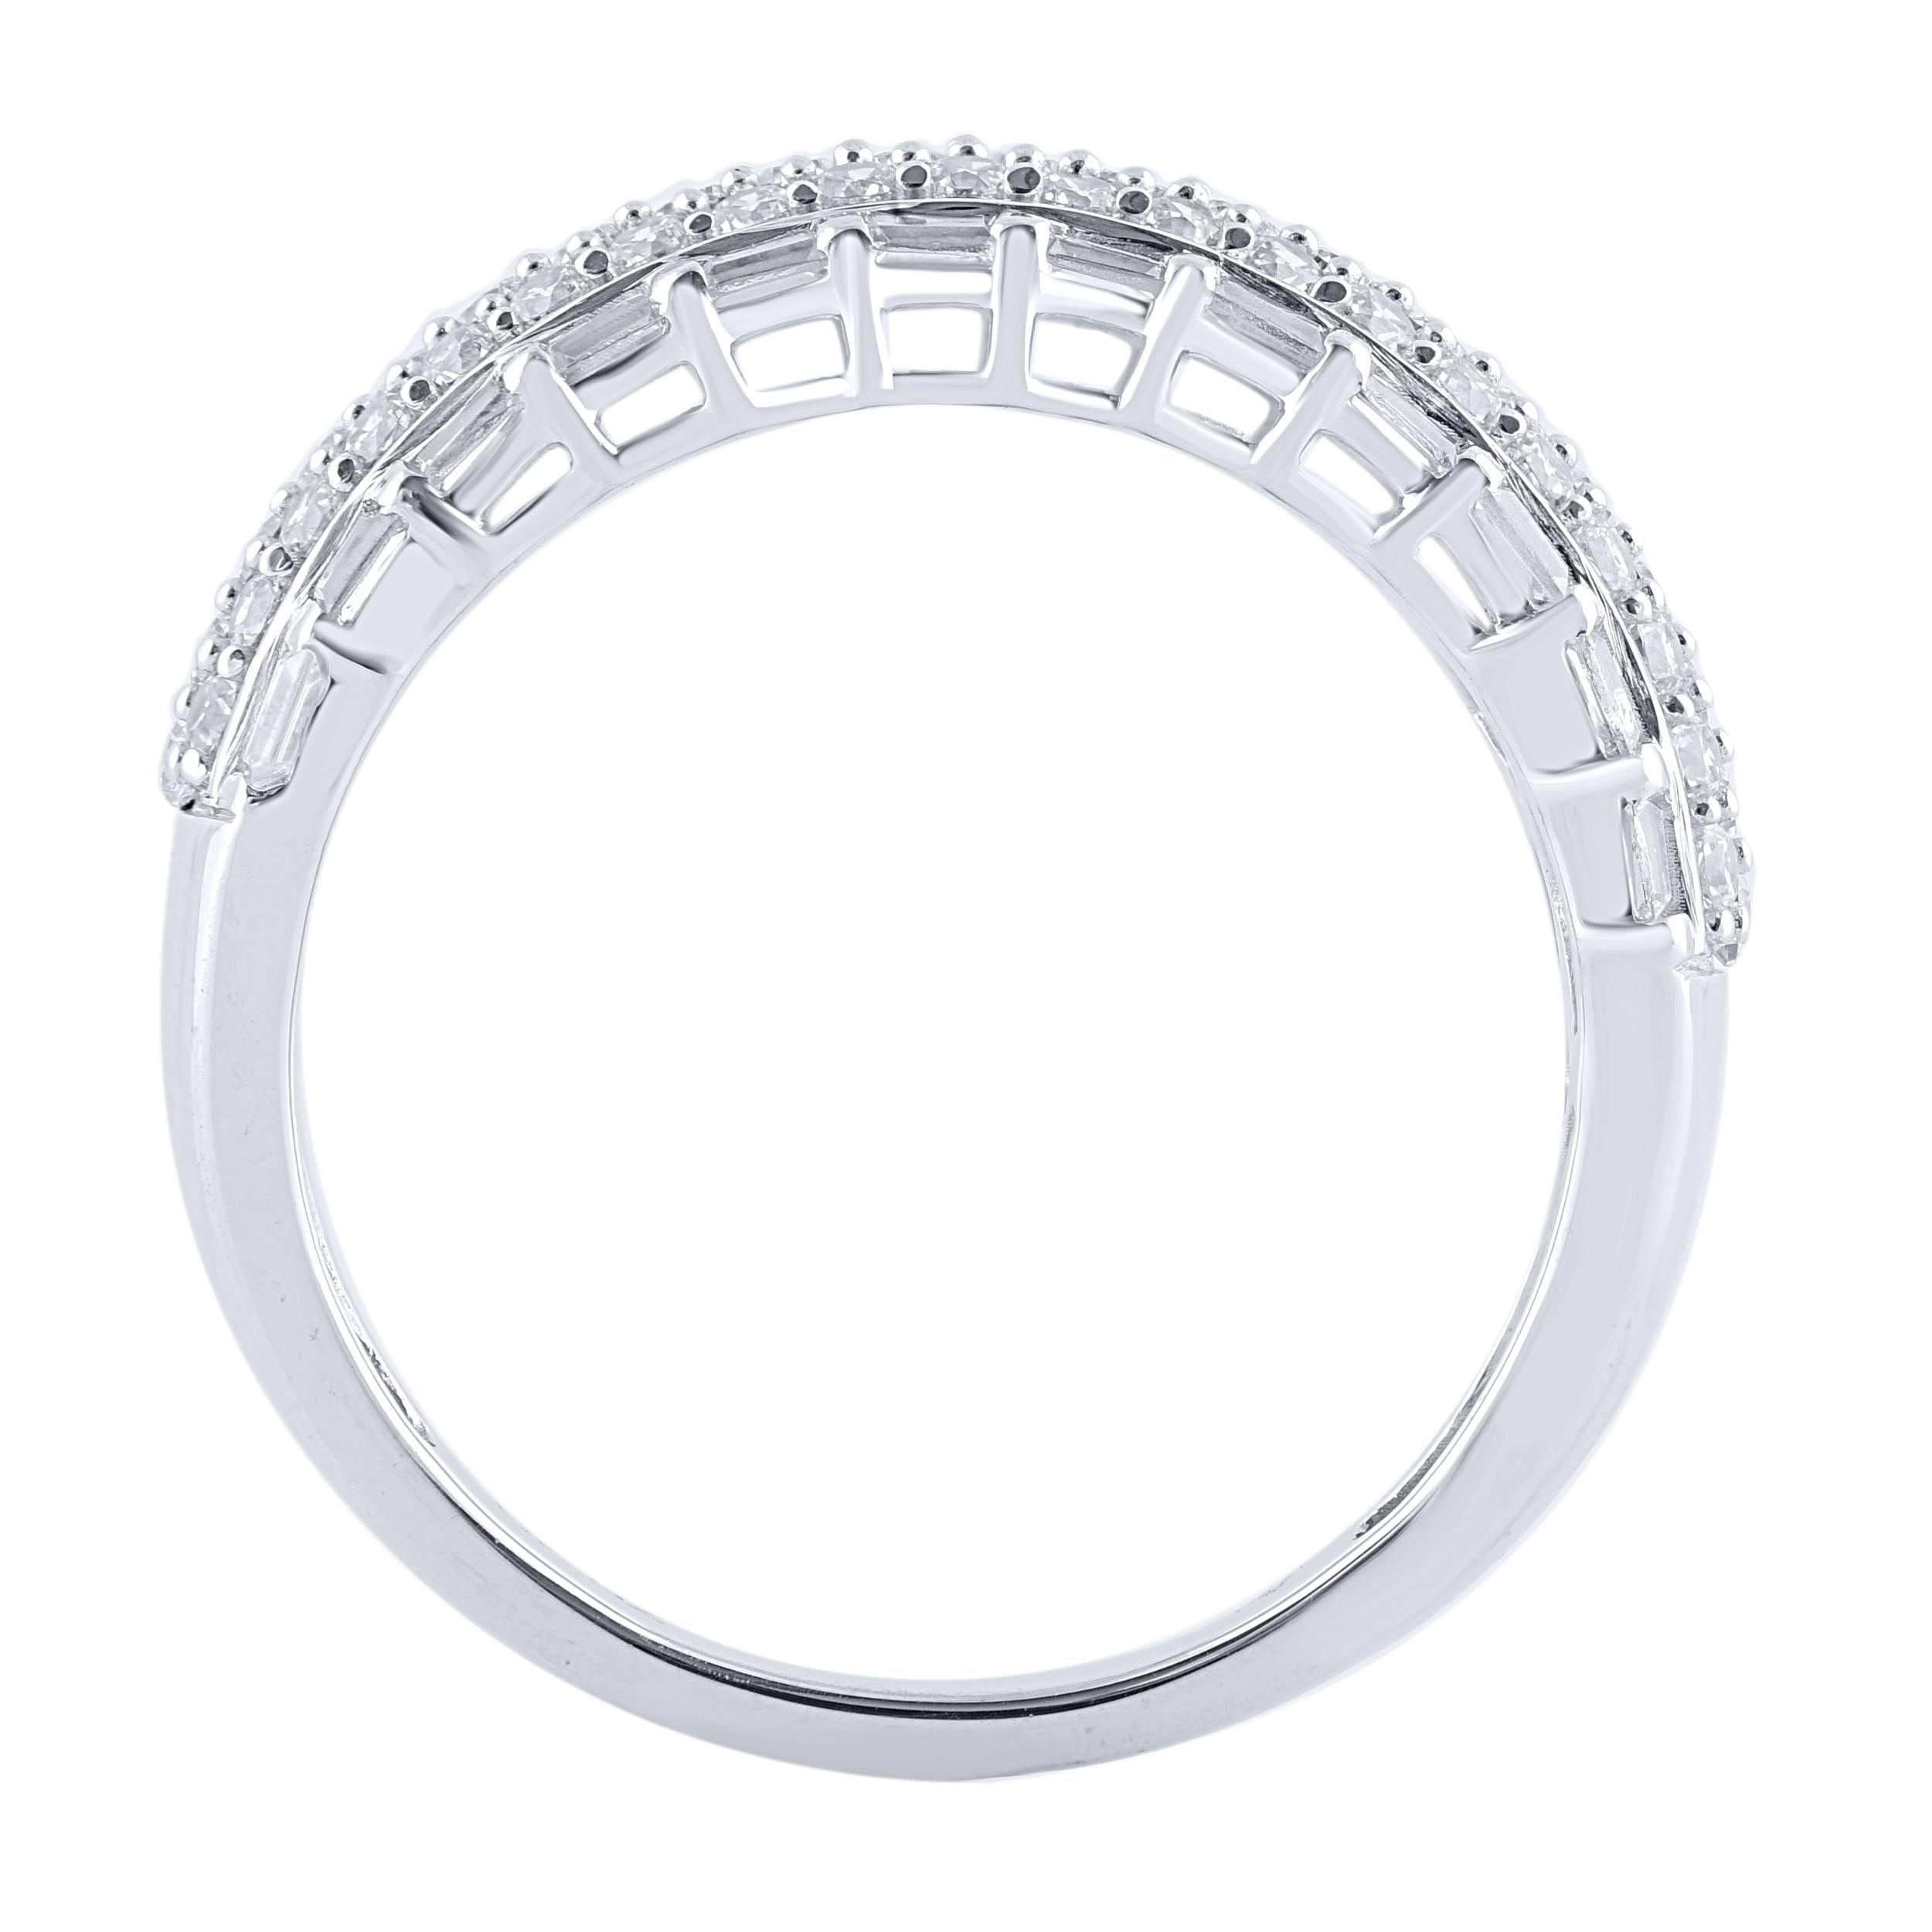 Contemporary TJD 1.0 Carat Round & Baguette Diamond Band Ring in 14 Karat White Gold For Sale